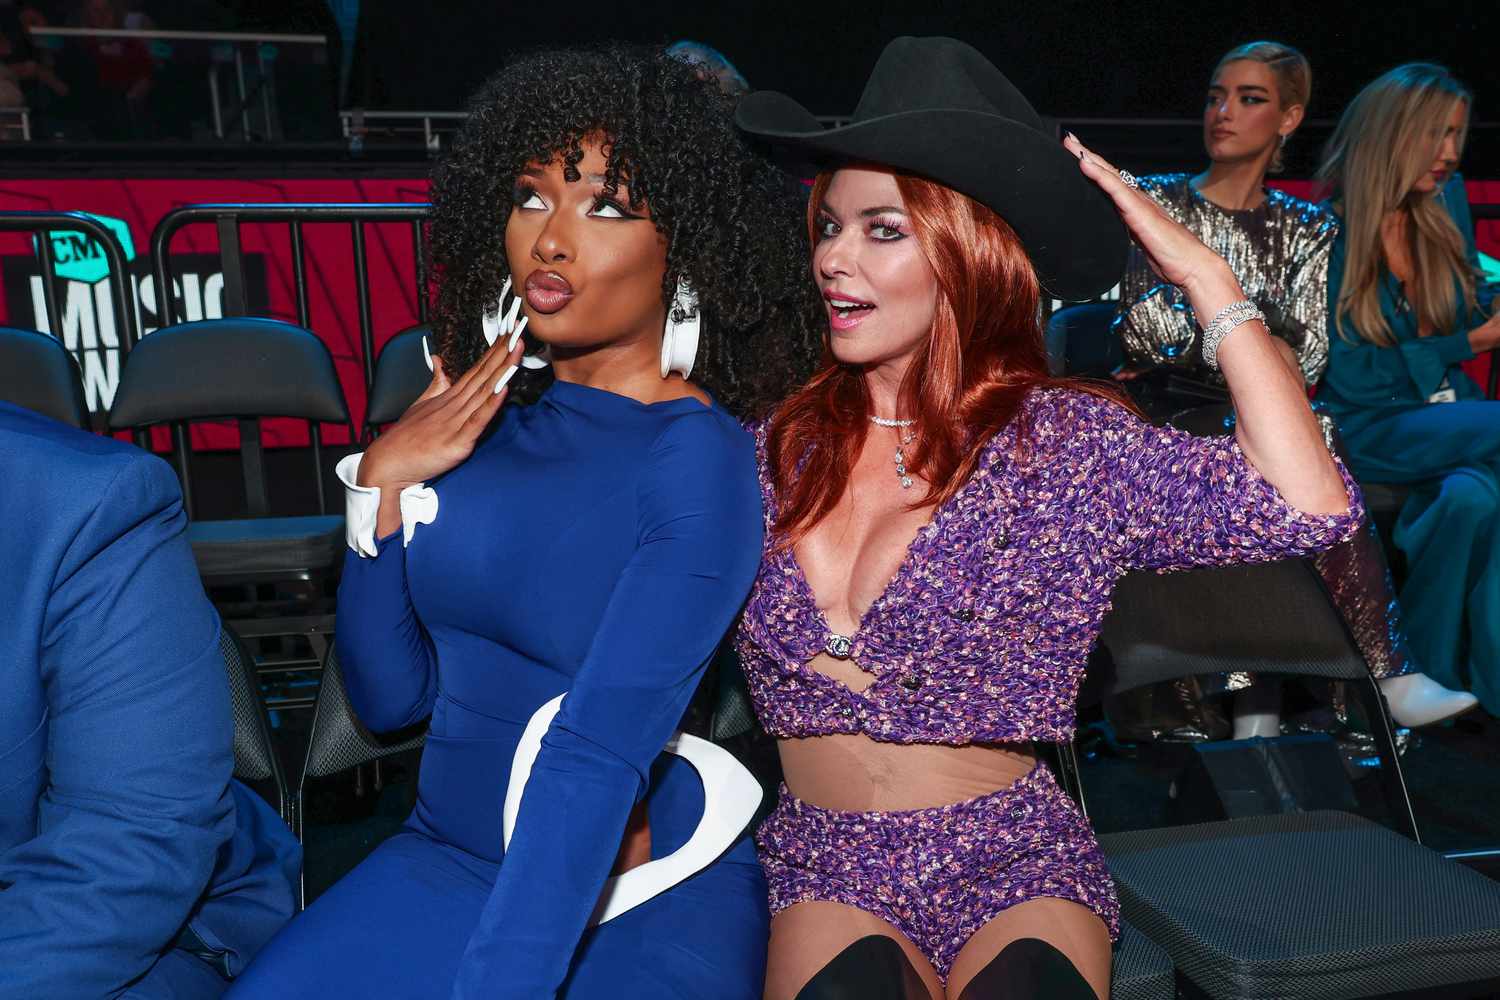 Shania Twain Hails Megan Thee Stallion as a "Great Talent" and Expresses Interest in Collaboration